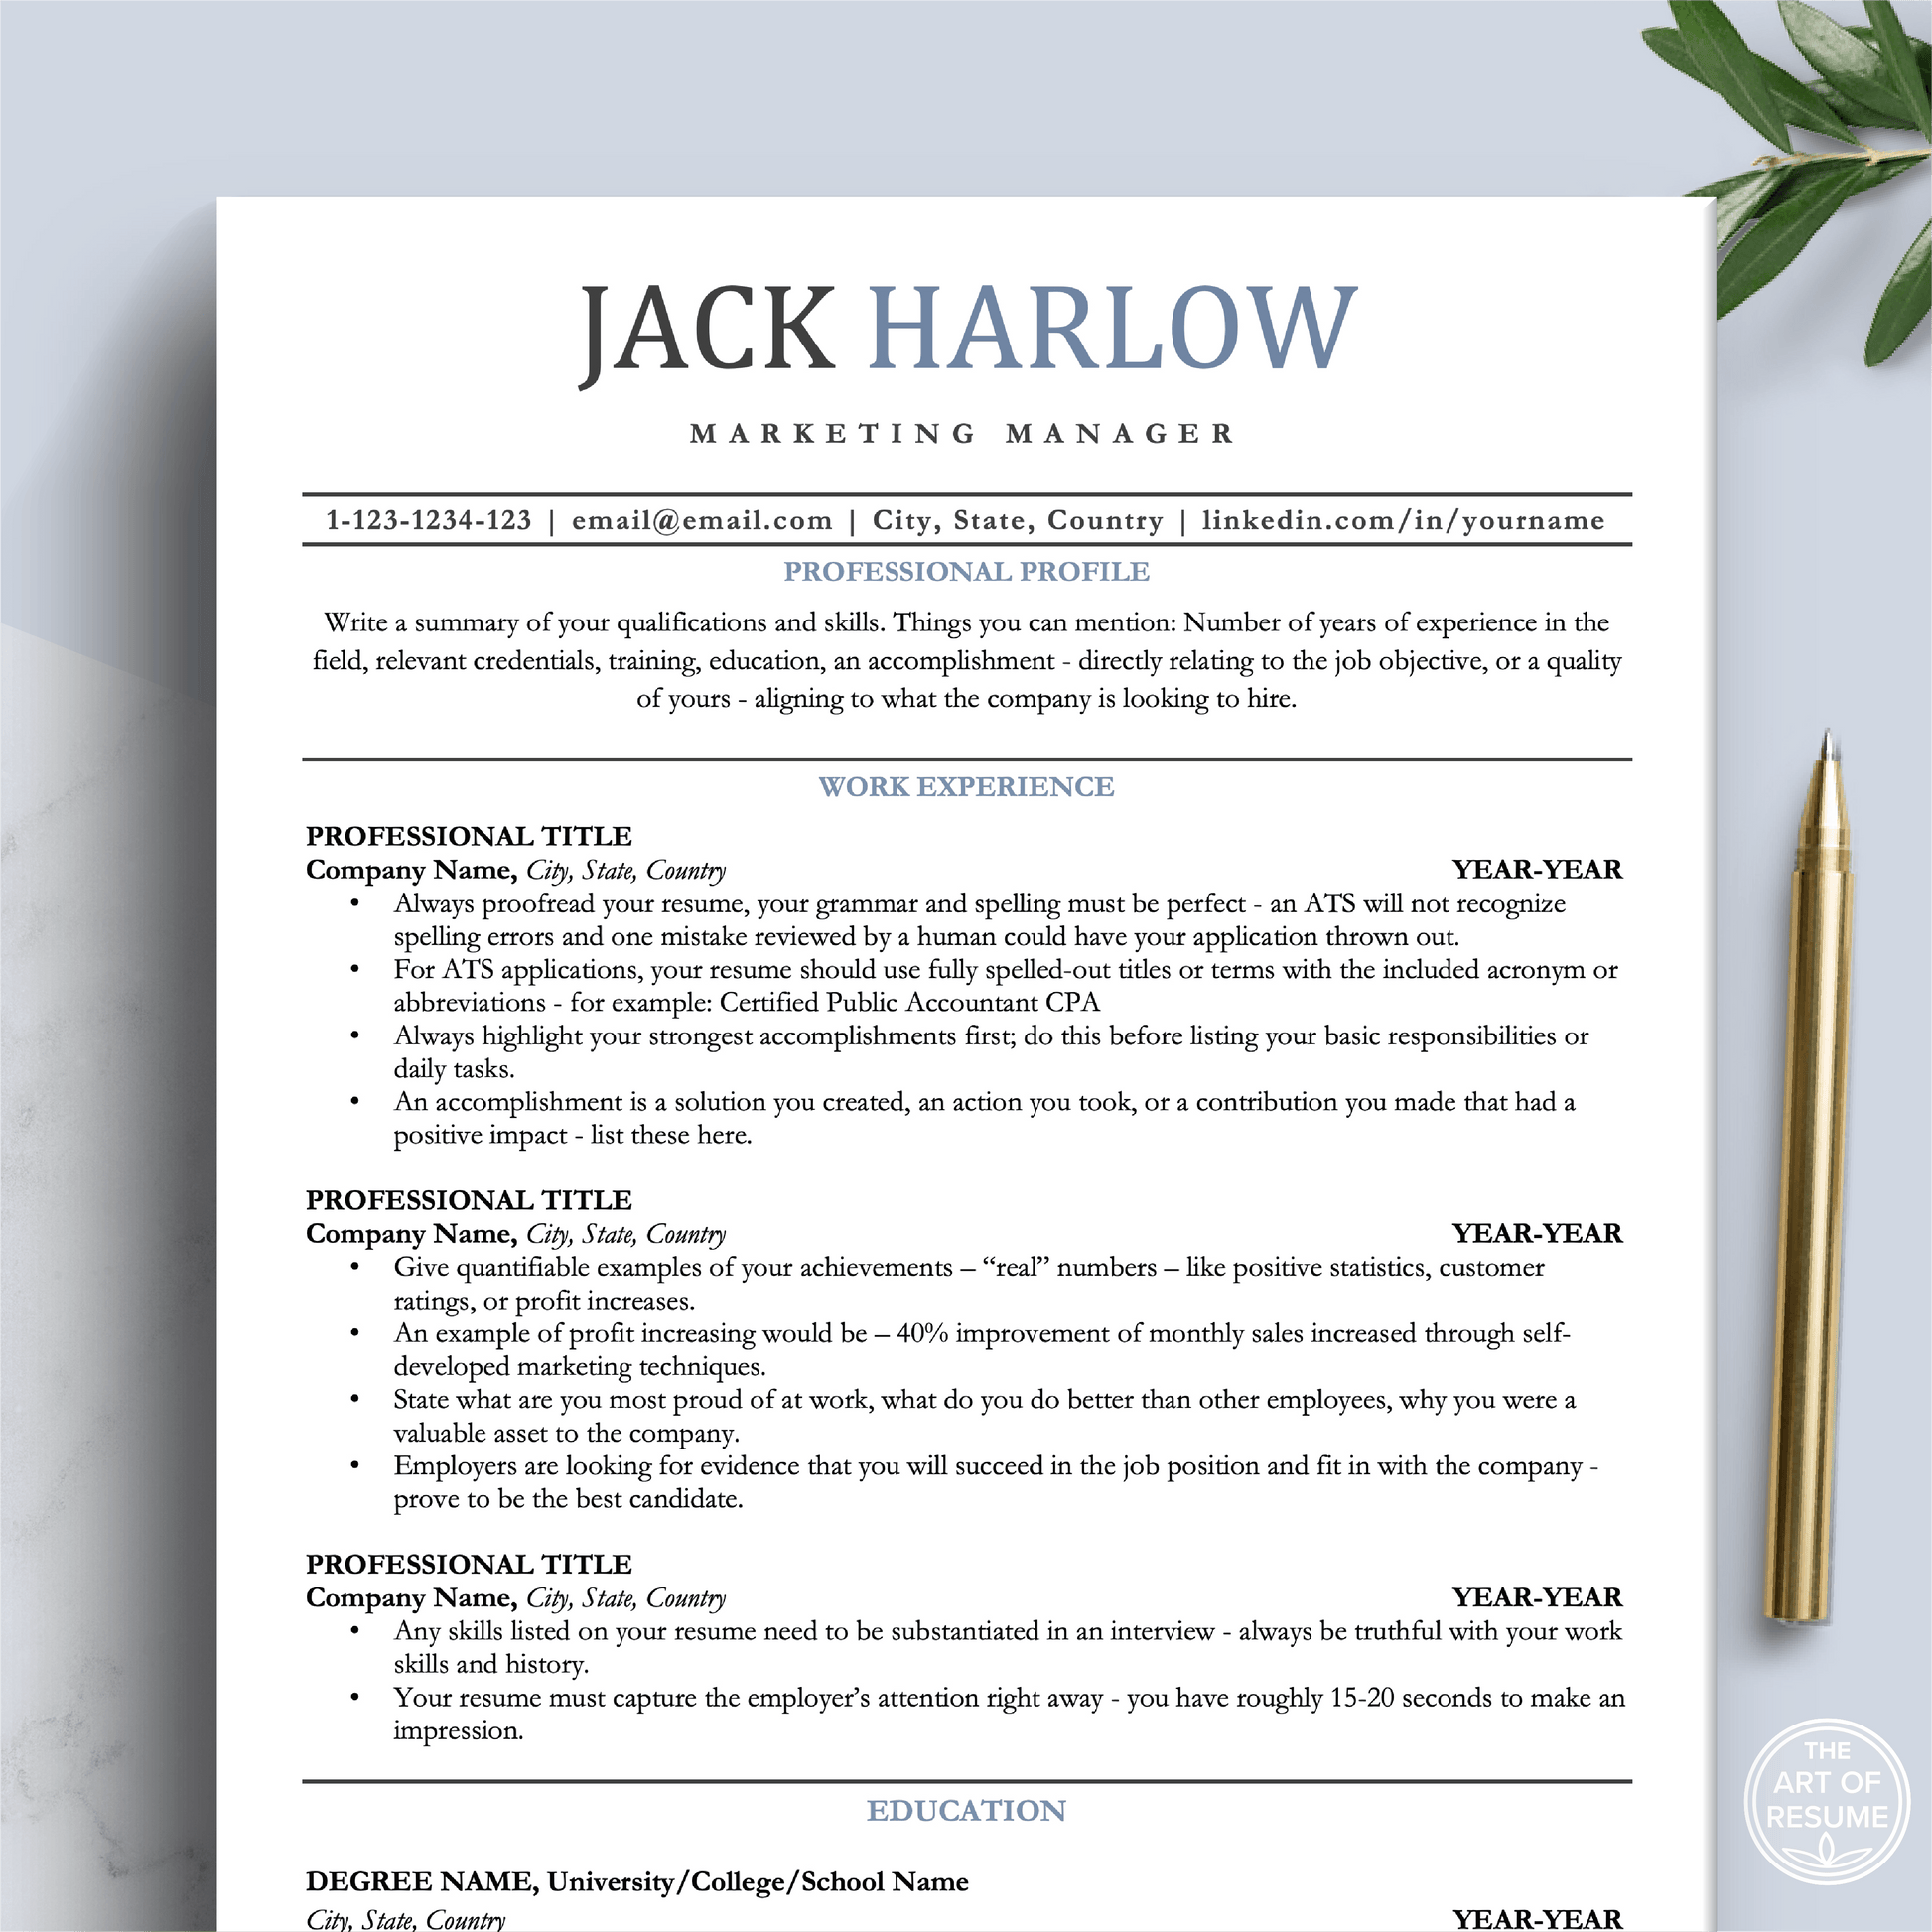 Professional ATS Resume CV Template | Applicant Tracking System Friendly | One-Column CV - The Art of Resume